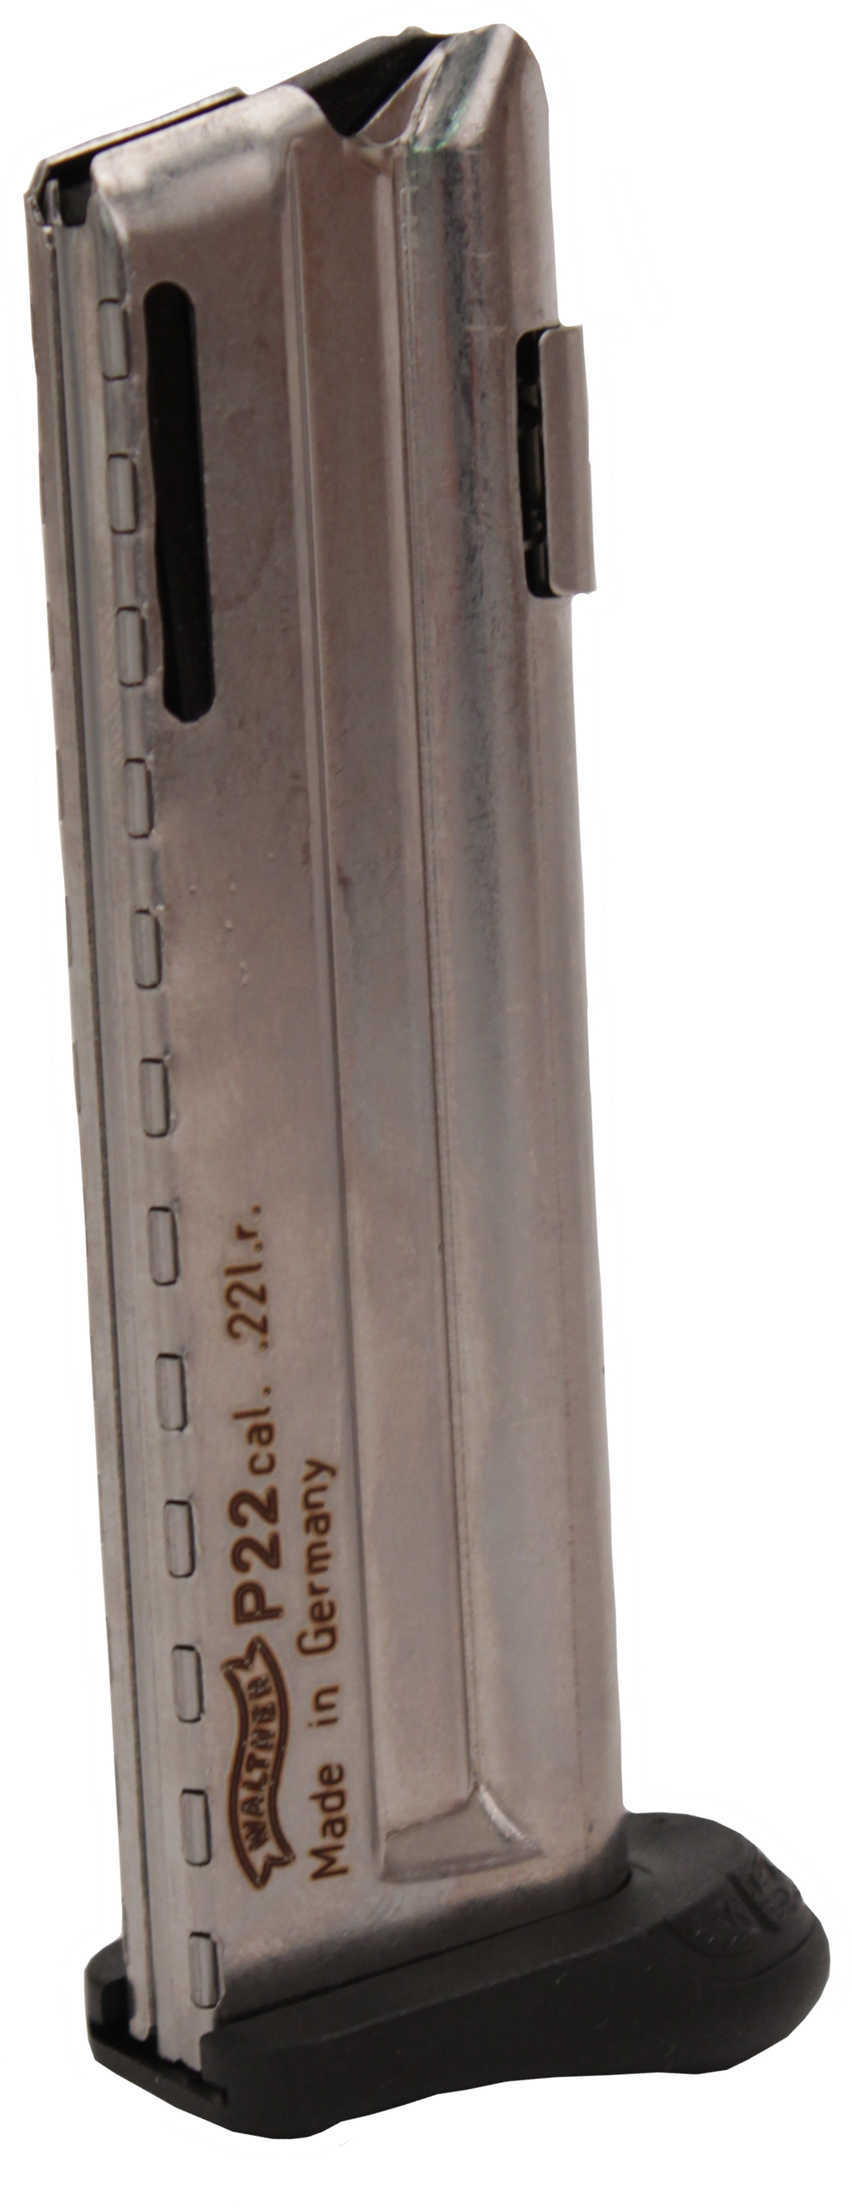 Walther Magazine 22LR 10Rd Fits P22 Nickel Q Style Frame 512604